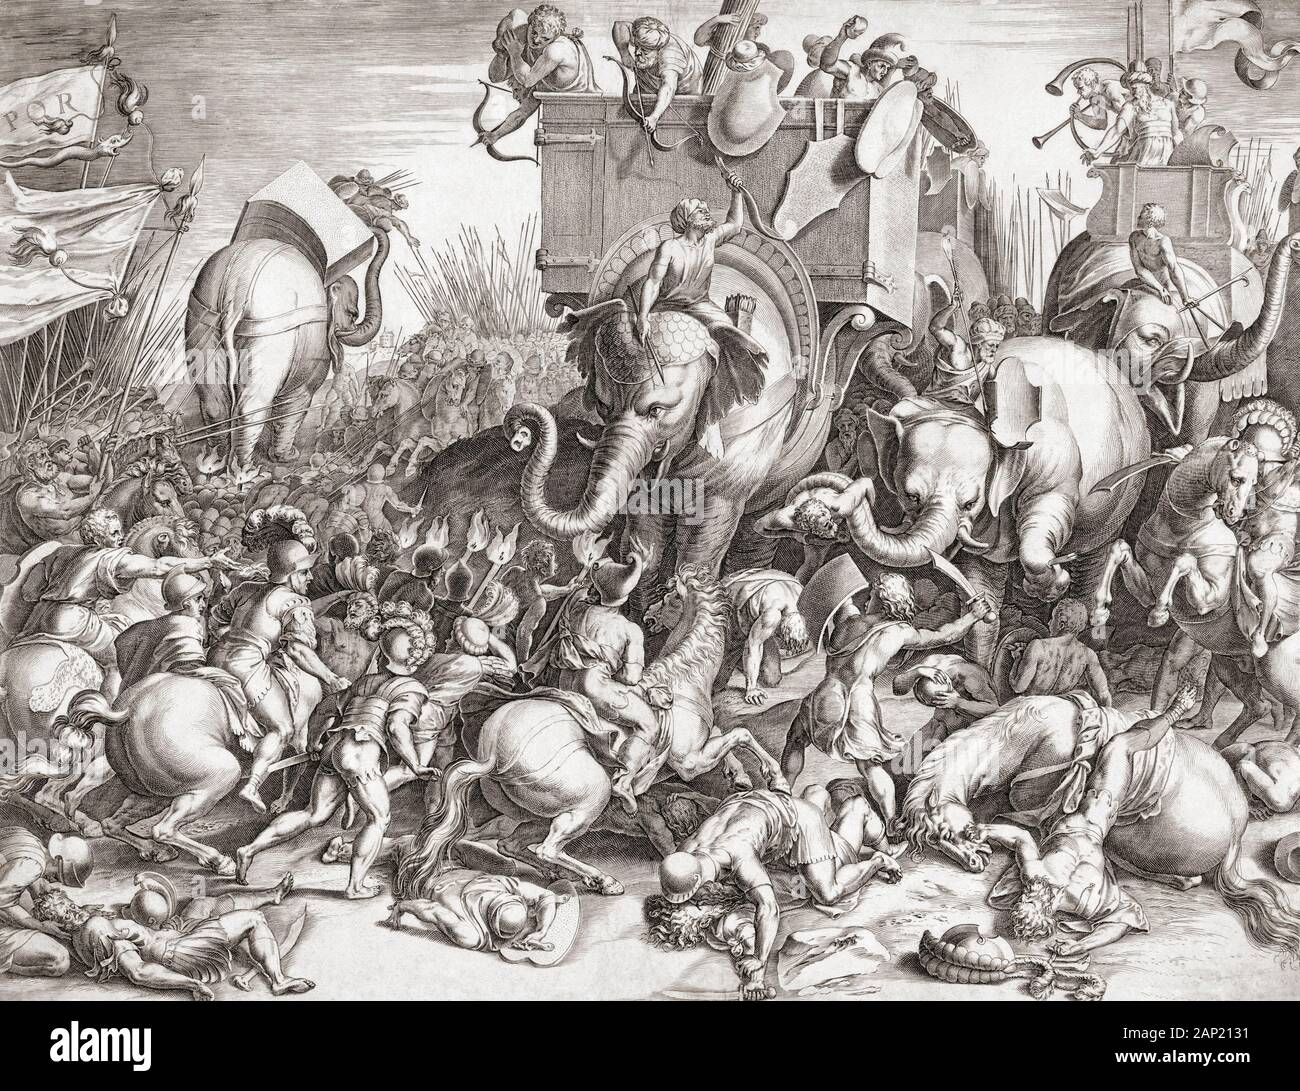 The Battle of Zama in 202 BC.  The Romans led by Scipio defeated the Carthaginians led by Hannibal Barca during the Second Punic War.  In this 16th century engraving Hannibal’s war elephants attack Roman cavalry. Stock Photo